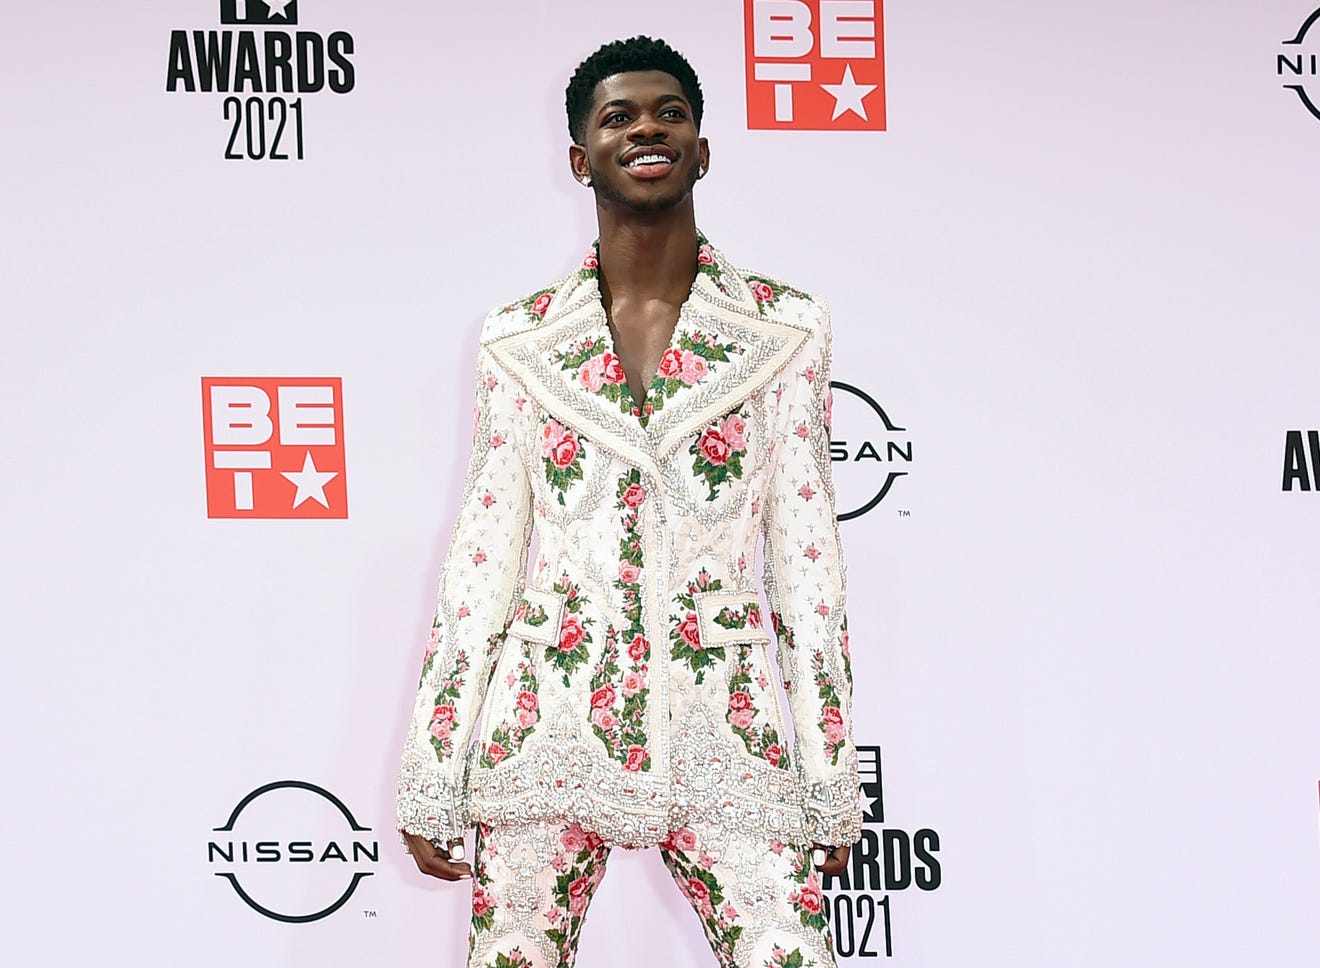 Lil Nas X arrives at the BET Awards on June 27, 2021. Sources: Jordan Strauss, Jordan Strauss/Invision/AP